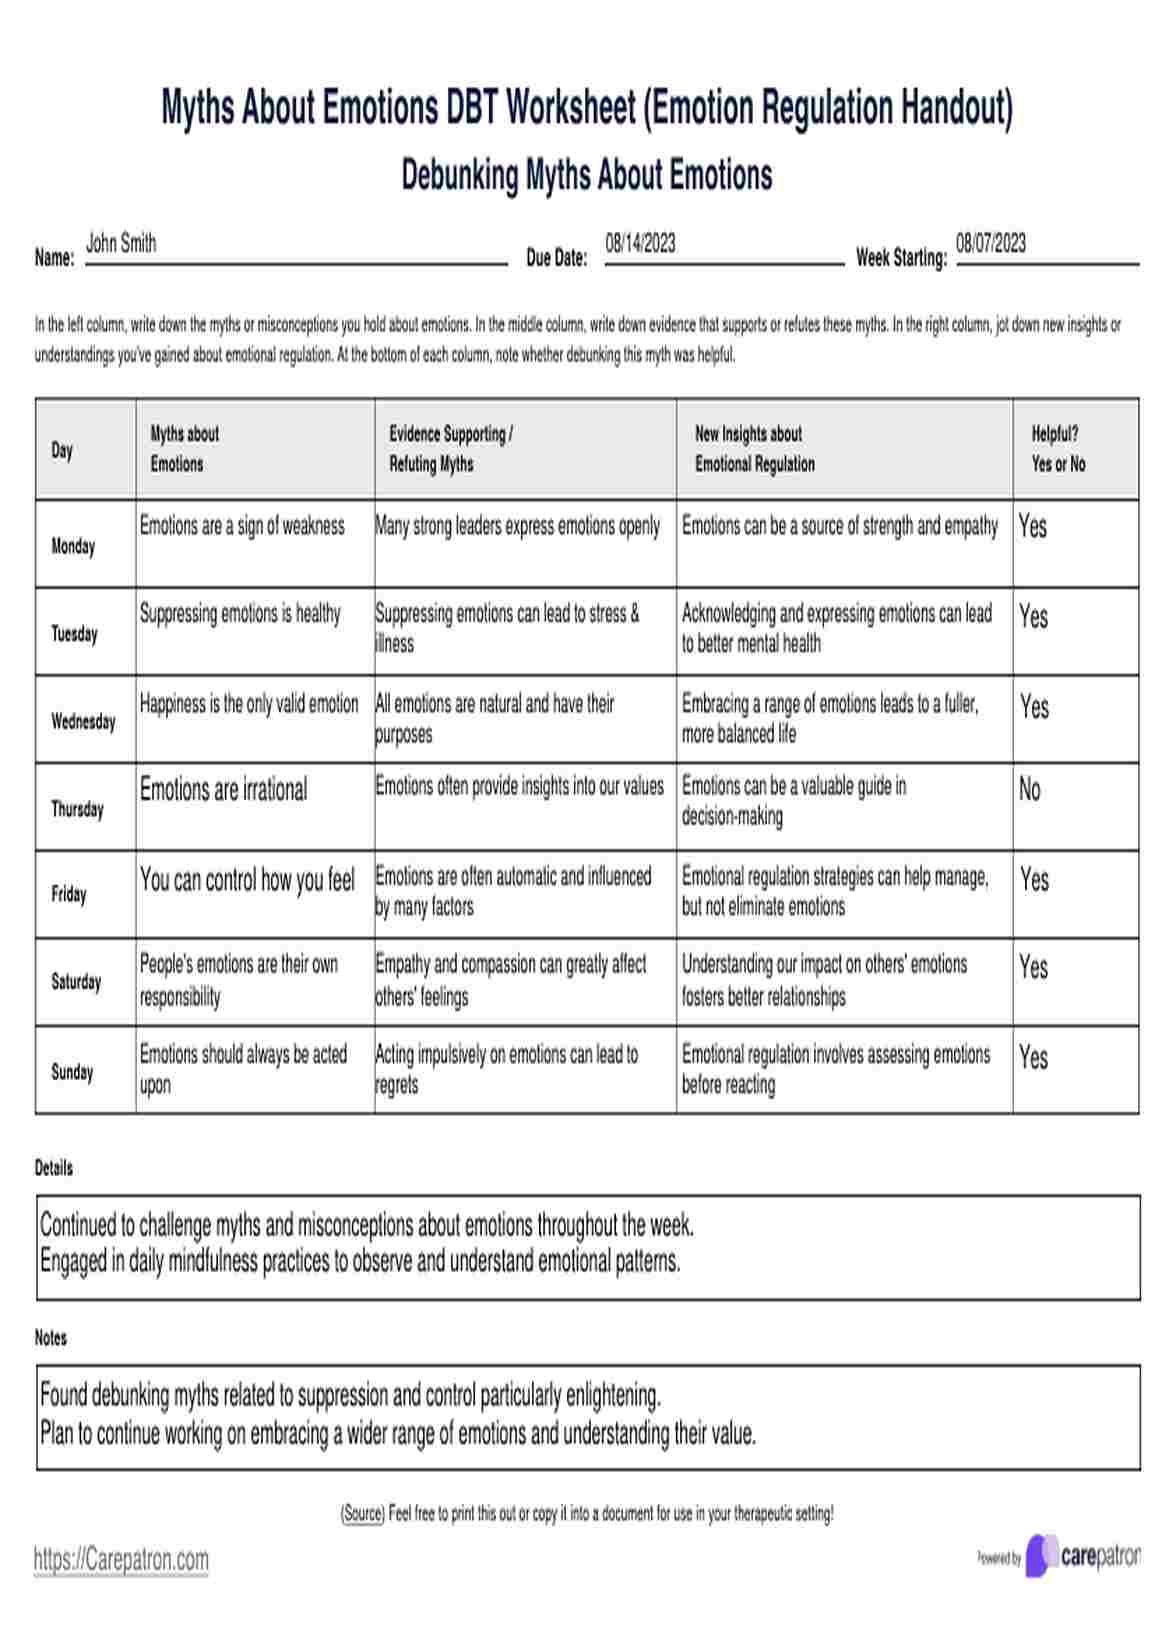 Myths About Emotions DBT Worksheet PDF Example